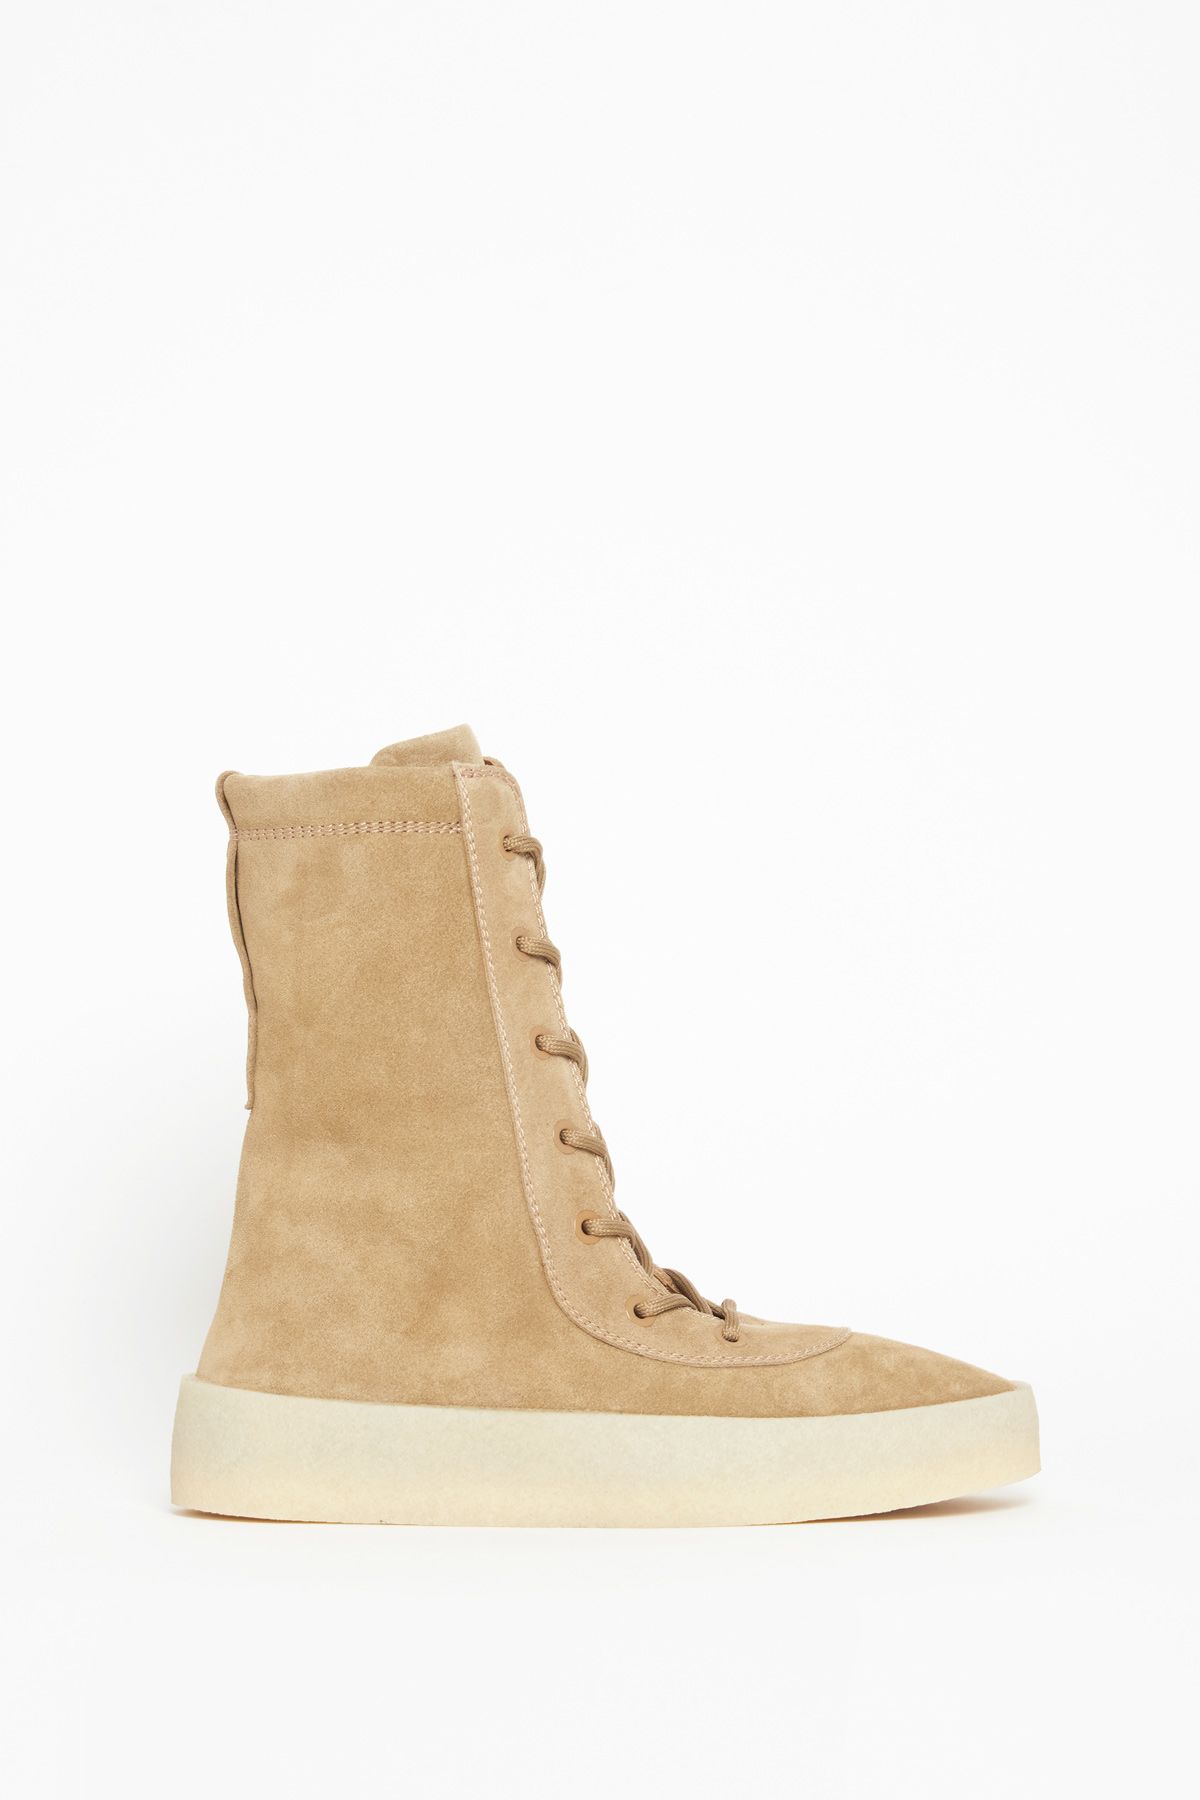 YEEZY Crepe-Sole Lace-Up Suede Boots in Beige | ModeSens